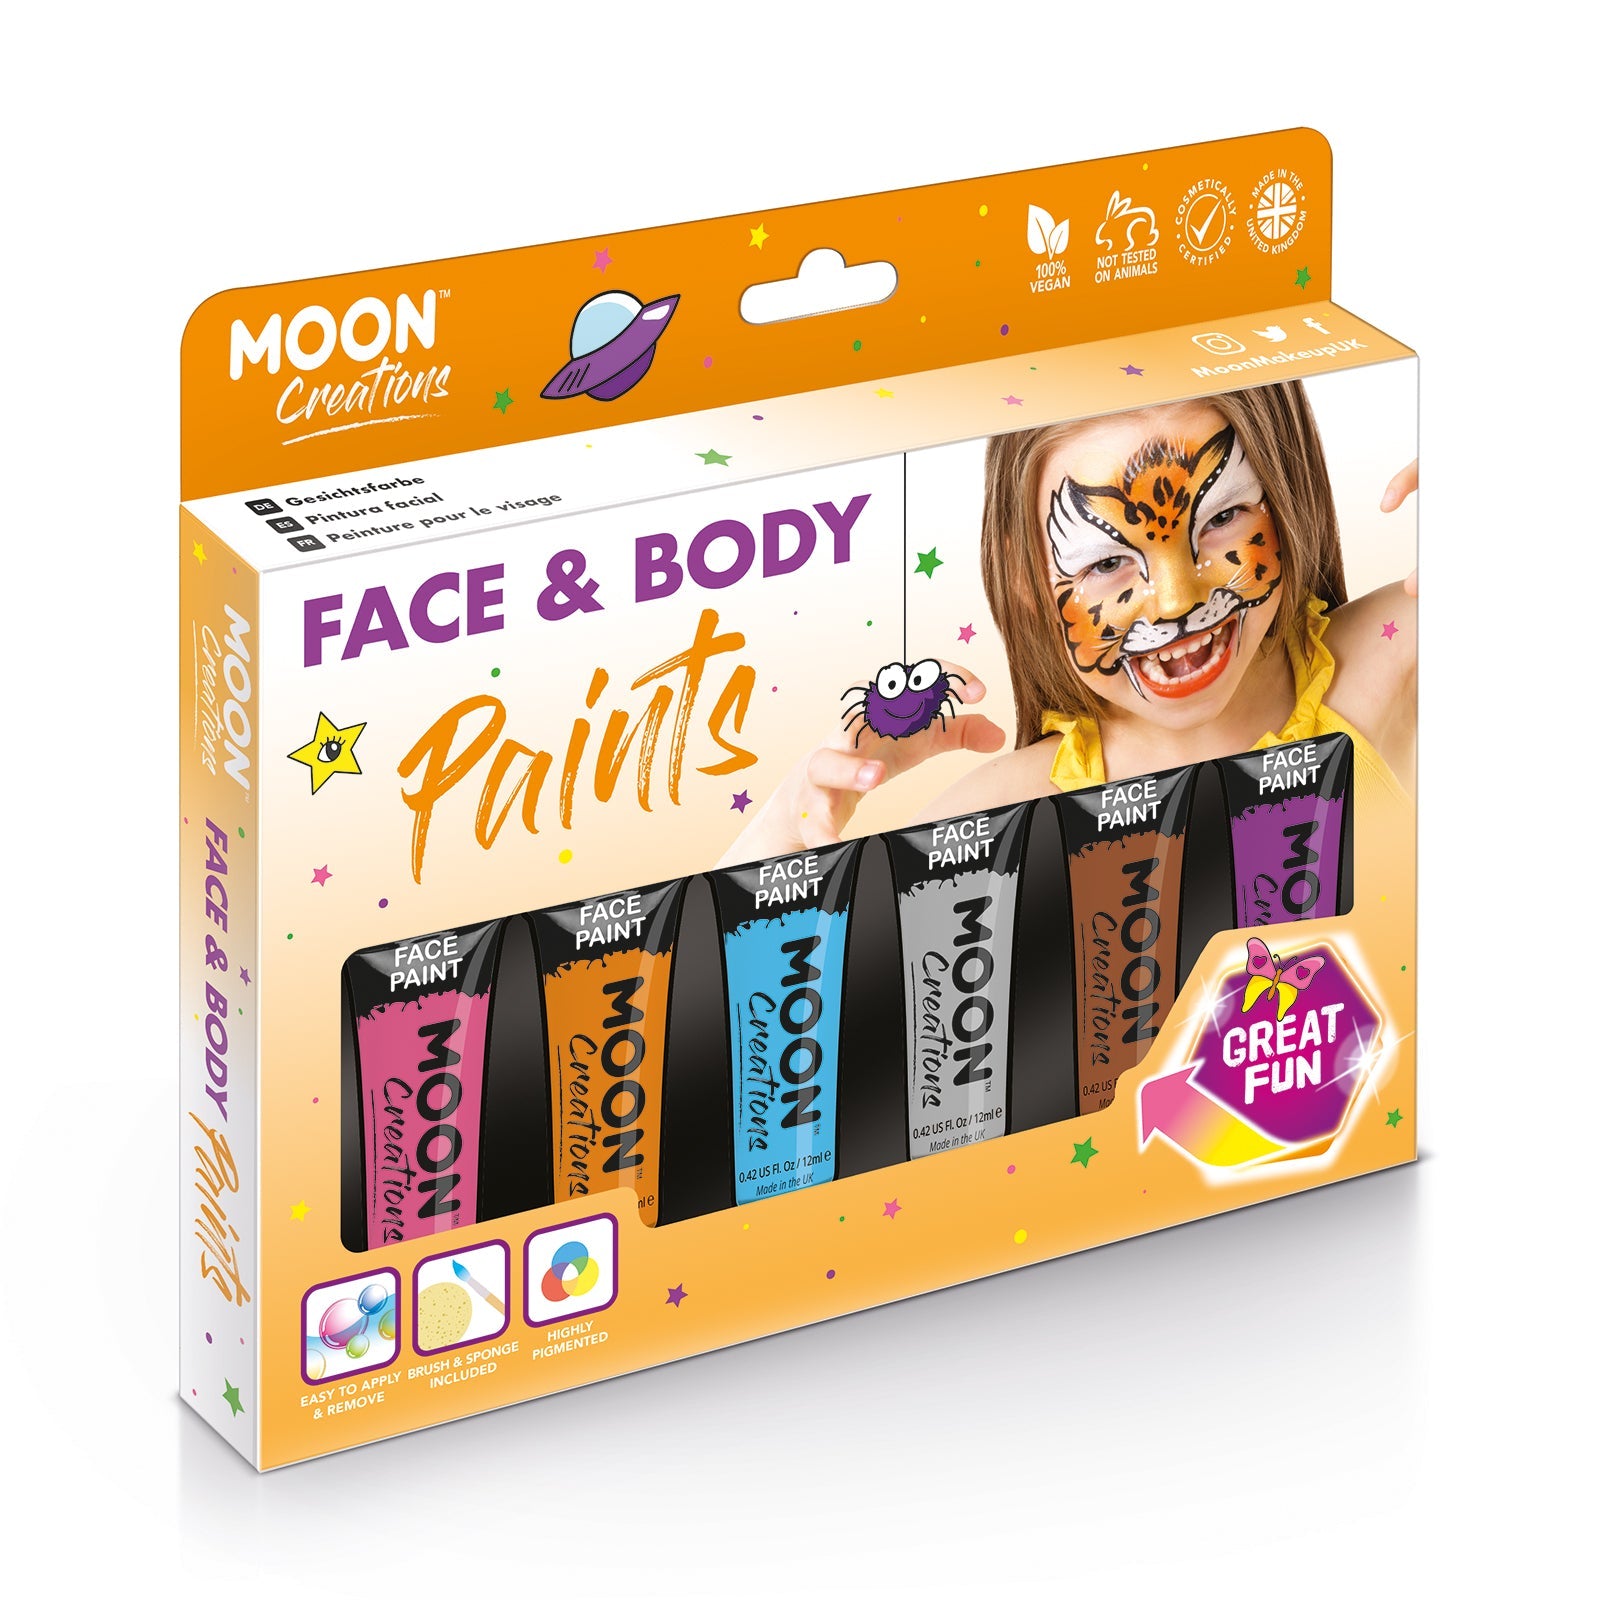 Face & Body Paint Makeup Adventure Colours Boxset - 6 tubes, brush, spo. Cosmetically certified, FDA & Health Canada compliant, cruelty free and vegan.